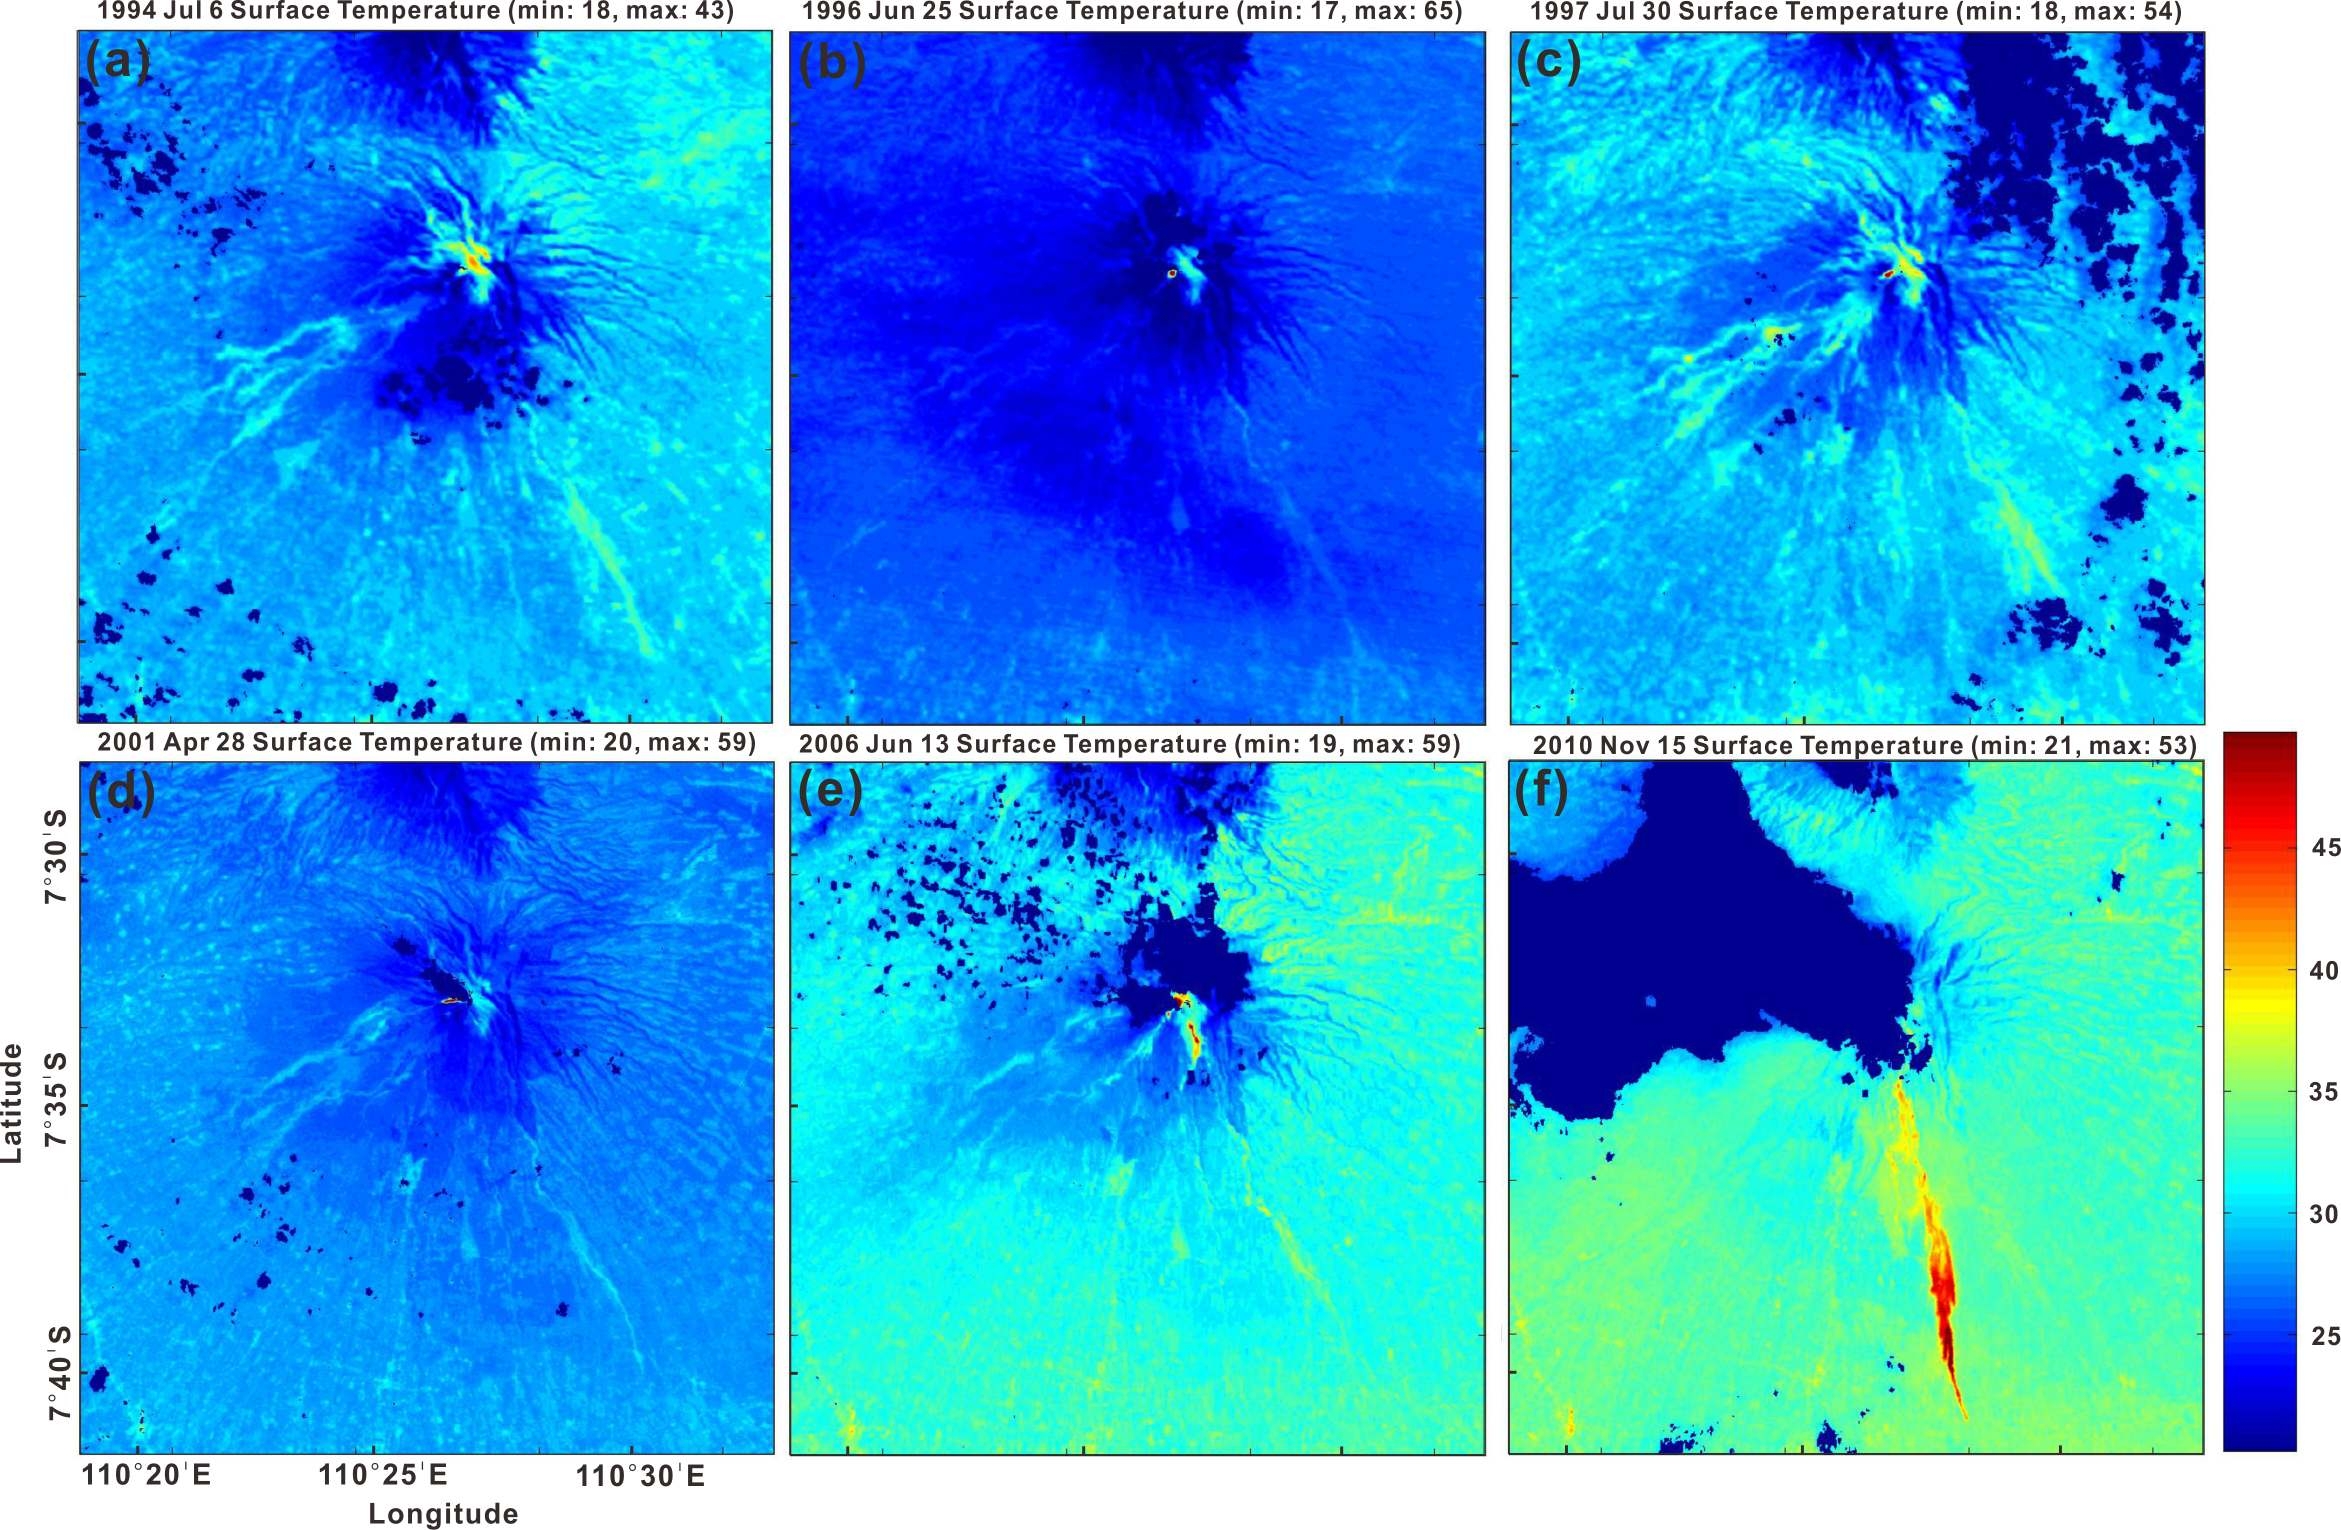 Fig. 3.2.14 Surface temperature at Merapi volcano from 1994 to 2012 using Landsat images.